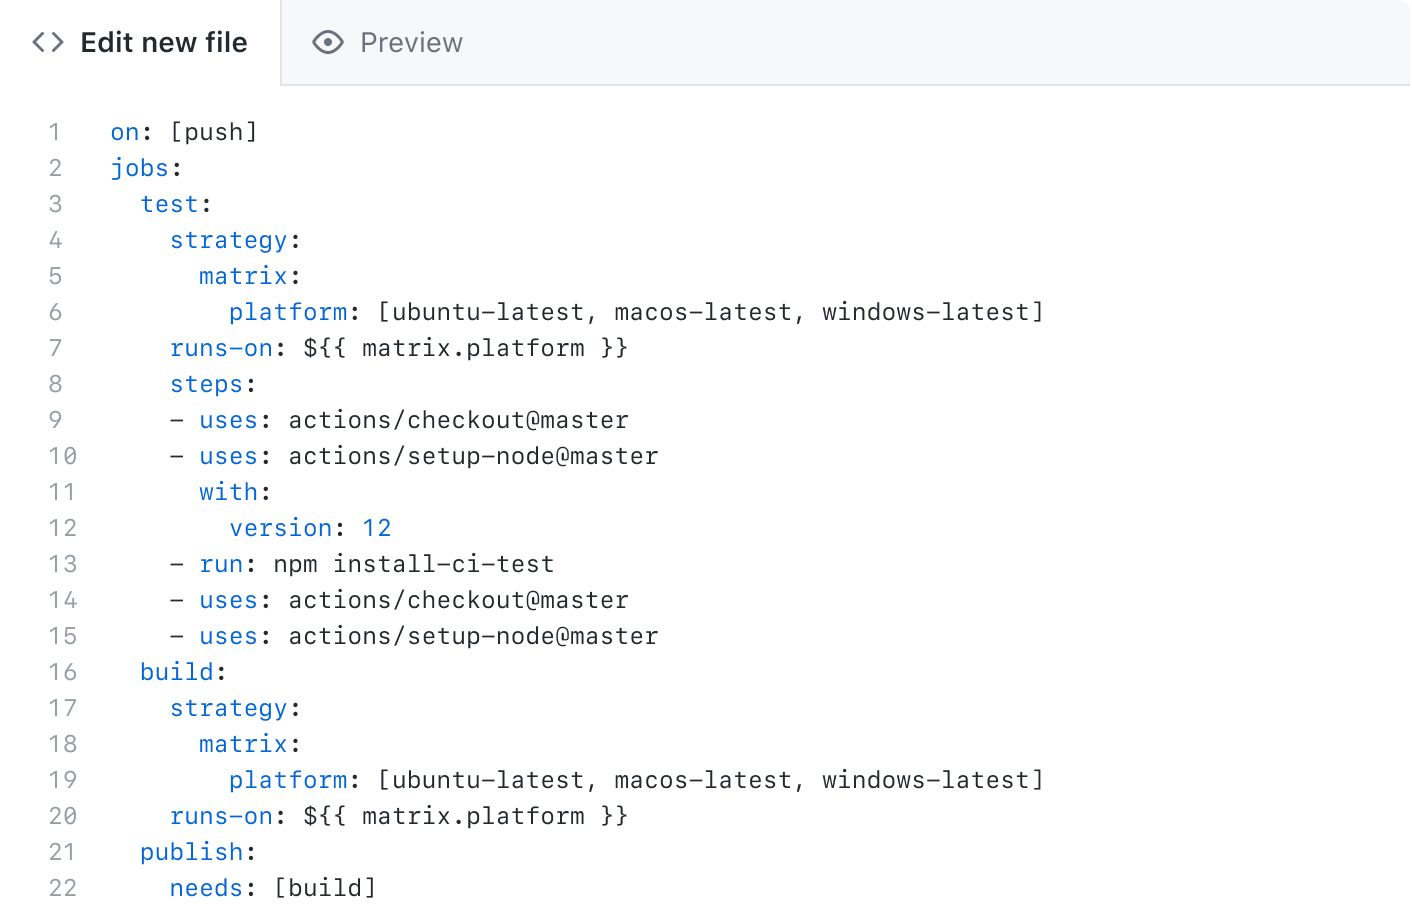 The GitHub Actions workflow editor